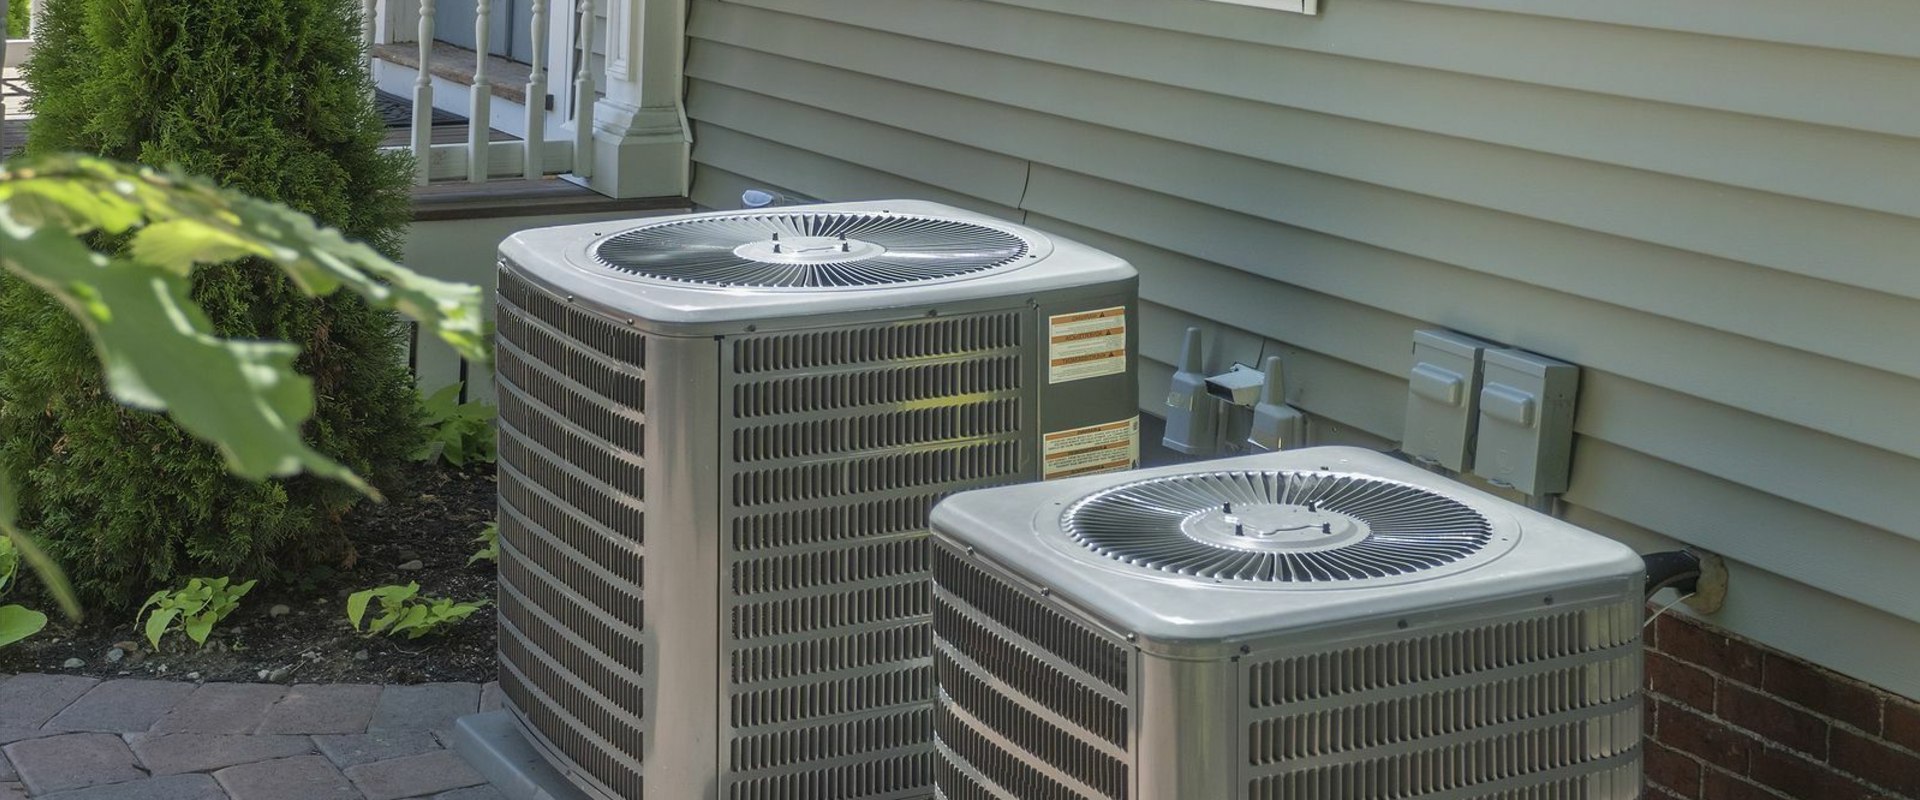 Choosing the Best HVAC Air Conditioning Tune Up Specials